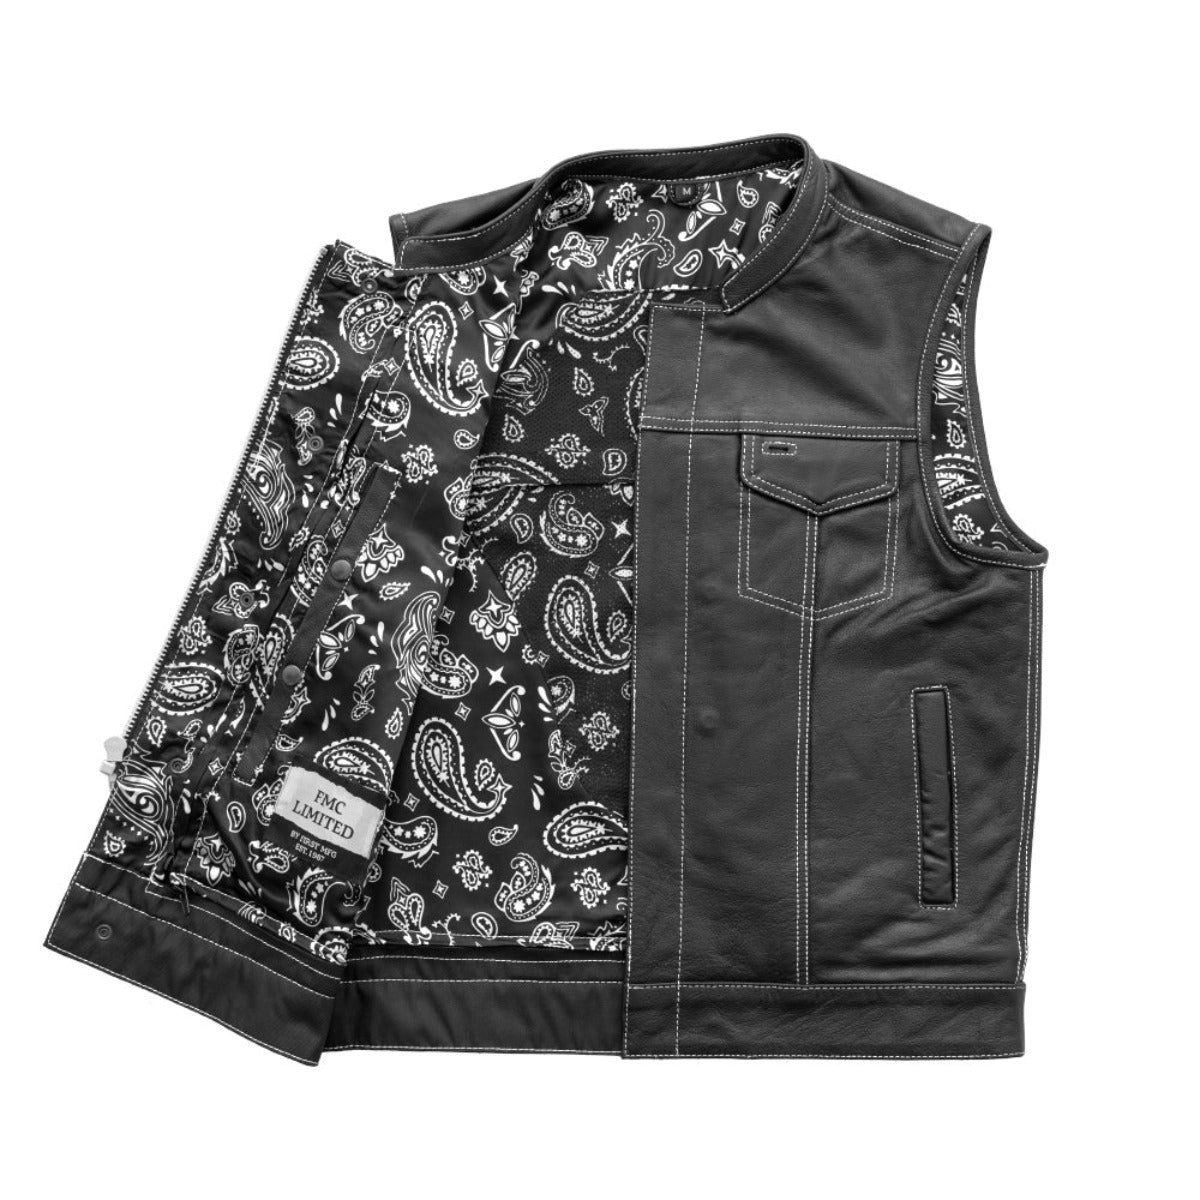 First Manufacturing Men's The Cut Motorcycle Leather Vest, Black/White